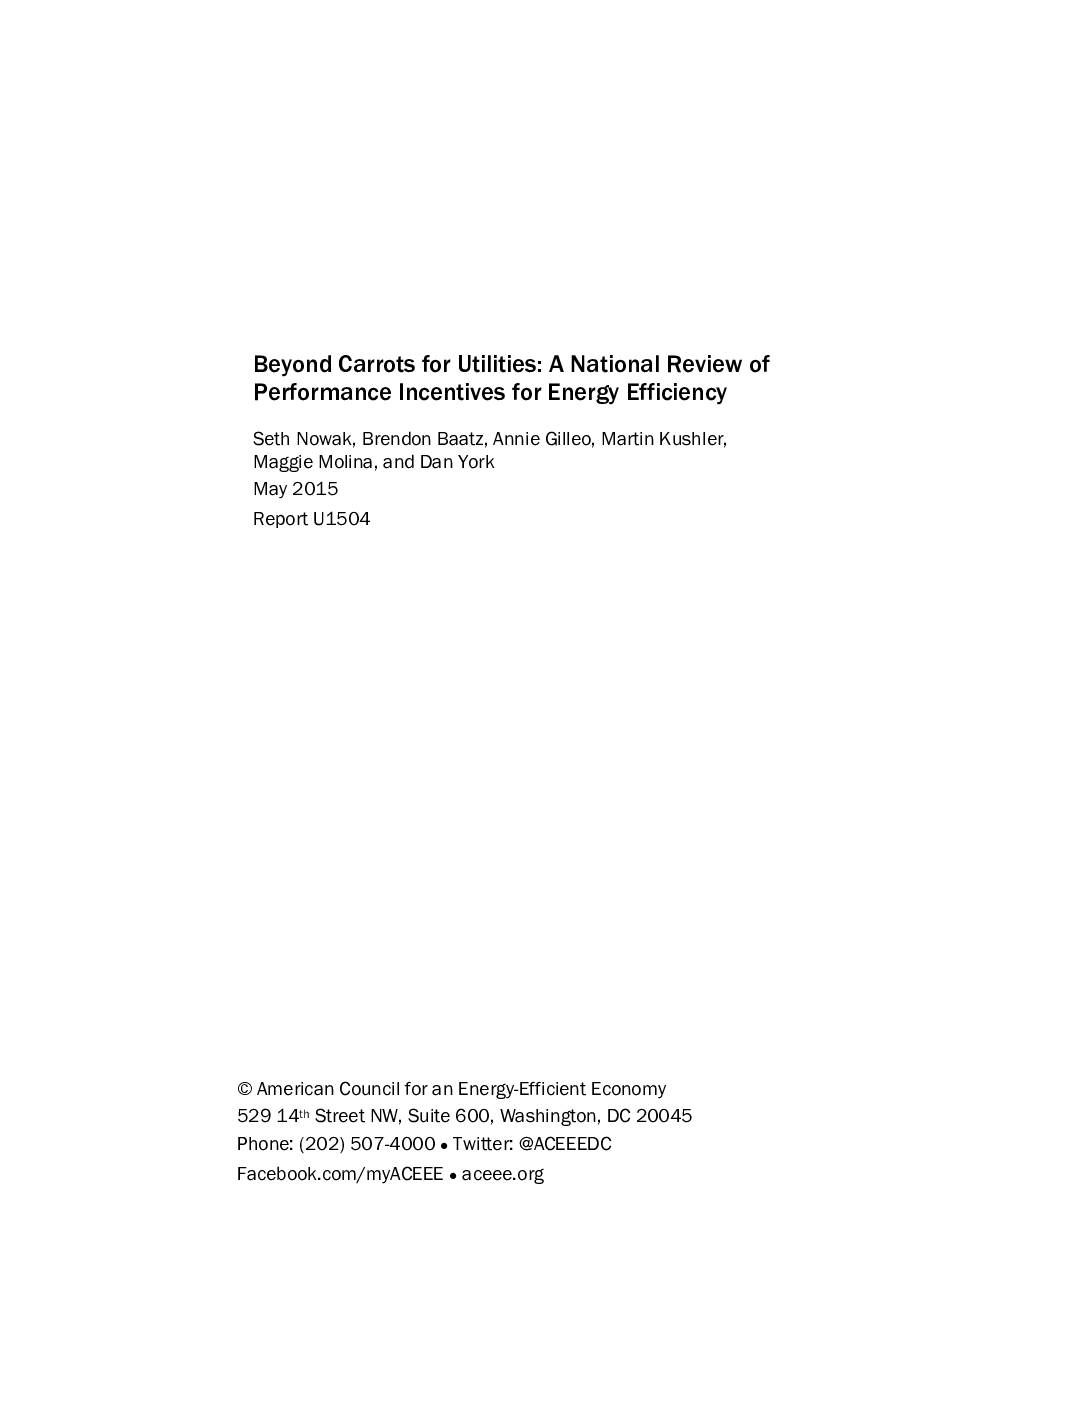 Beyond Carrots for Utilities: A National Review of Performance Incentives for Energy Efficiency